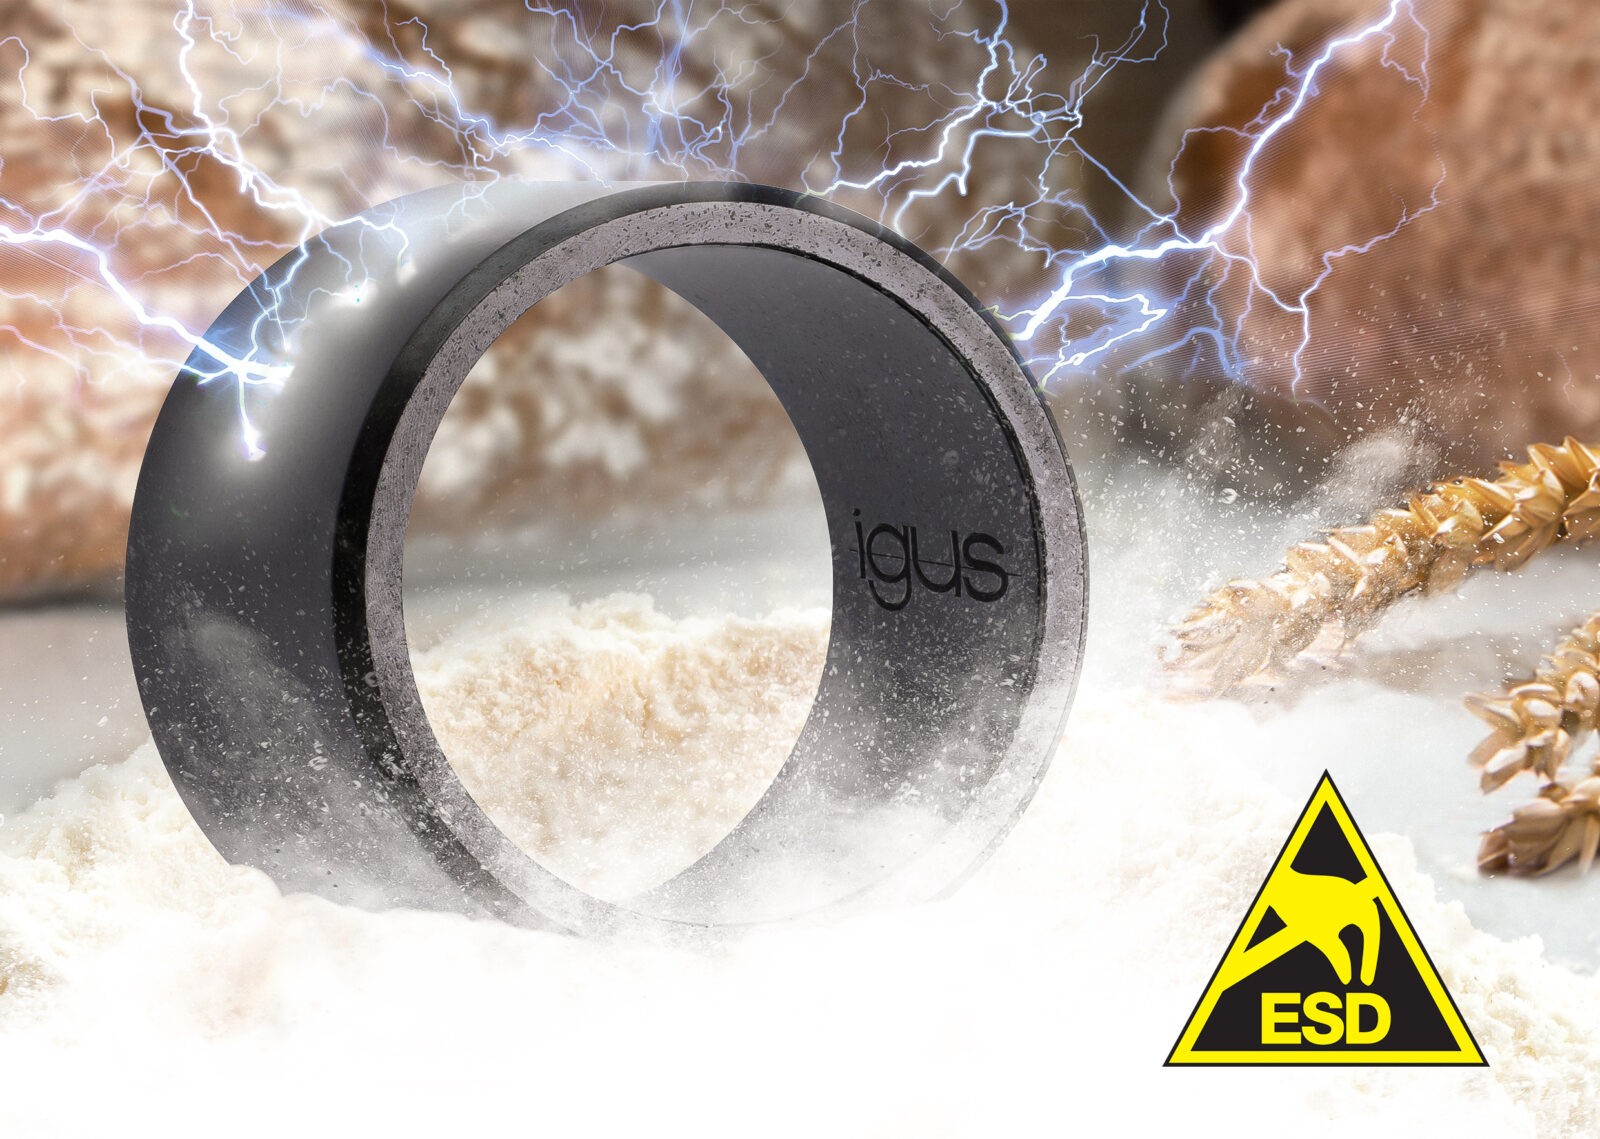 New igus sliding bearing for the food industry